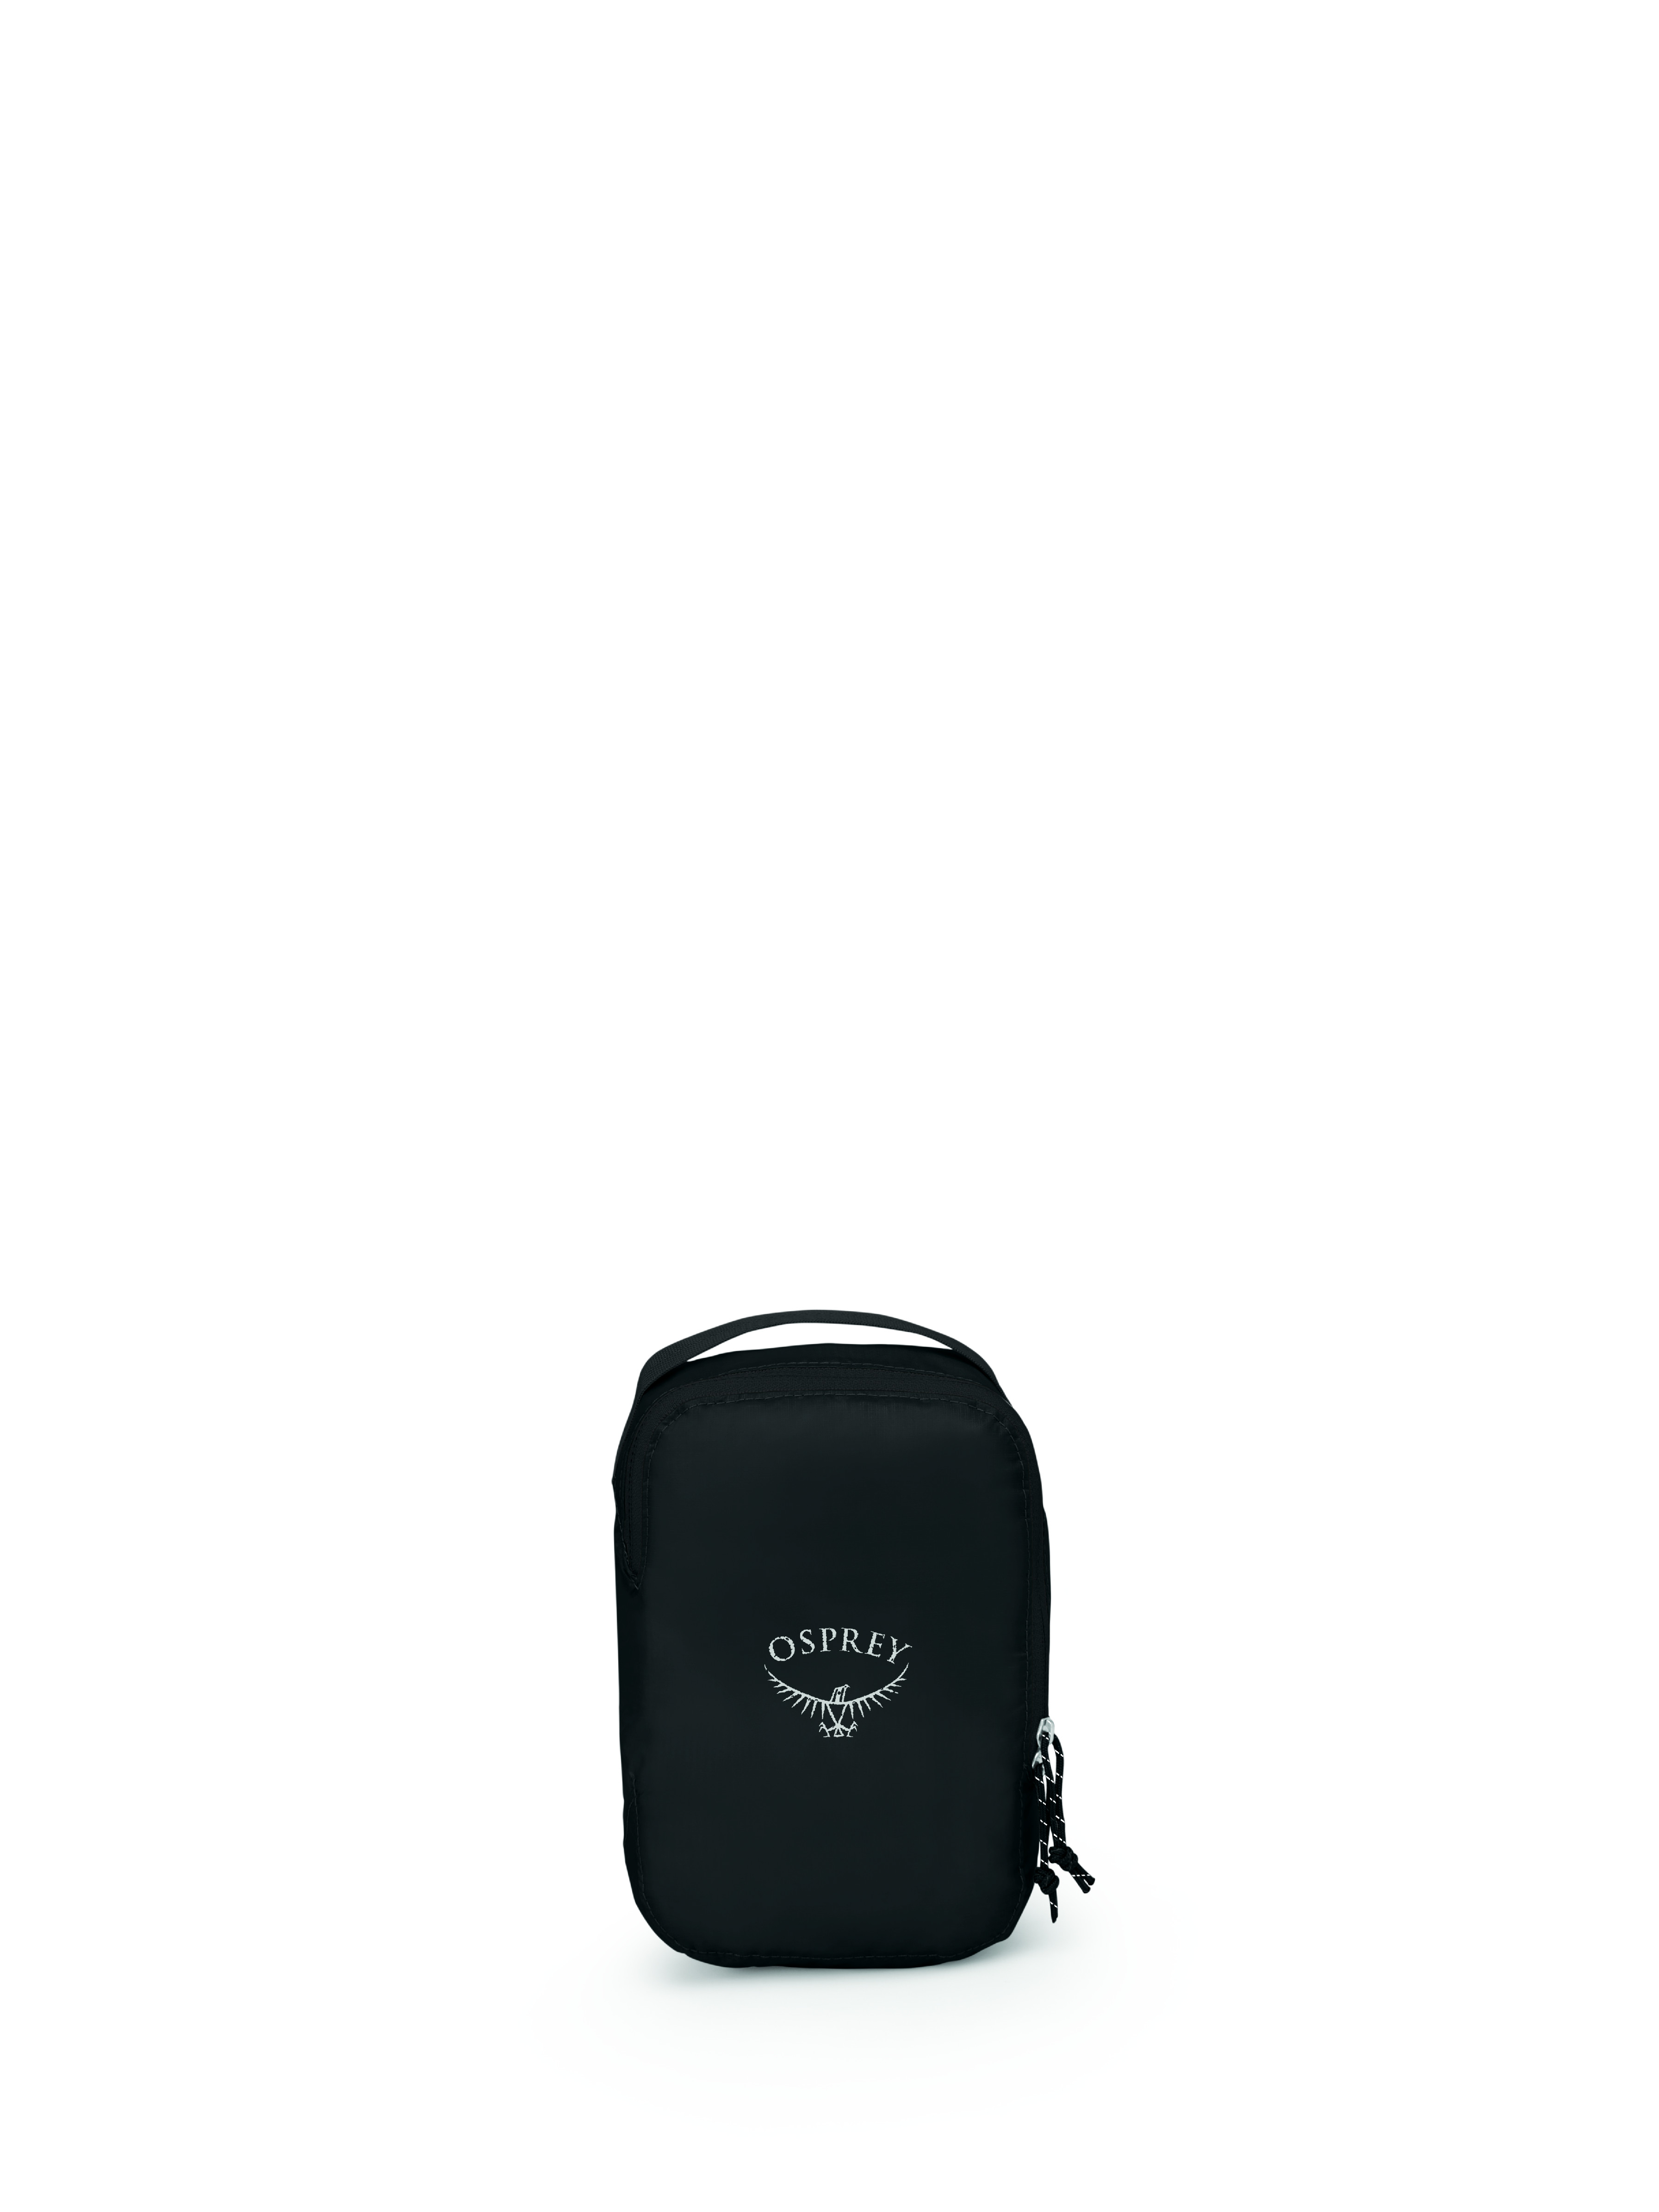 OSPREY PACKING CUBE SMALL Barva: black